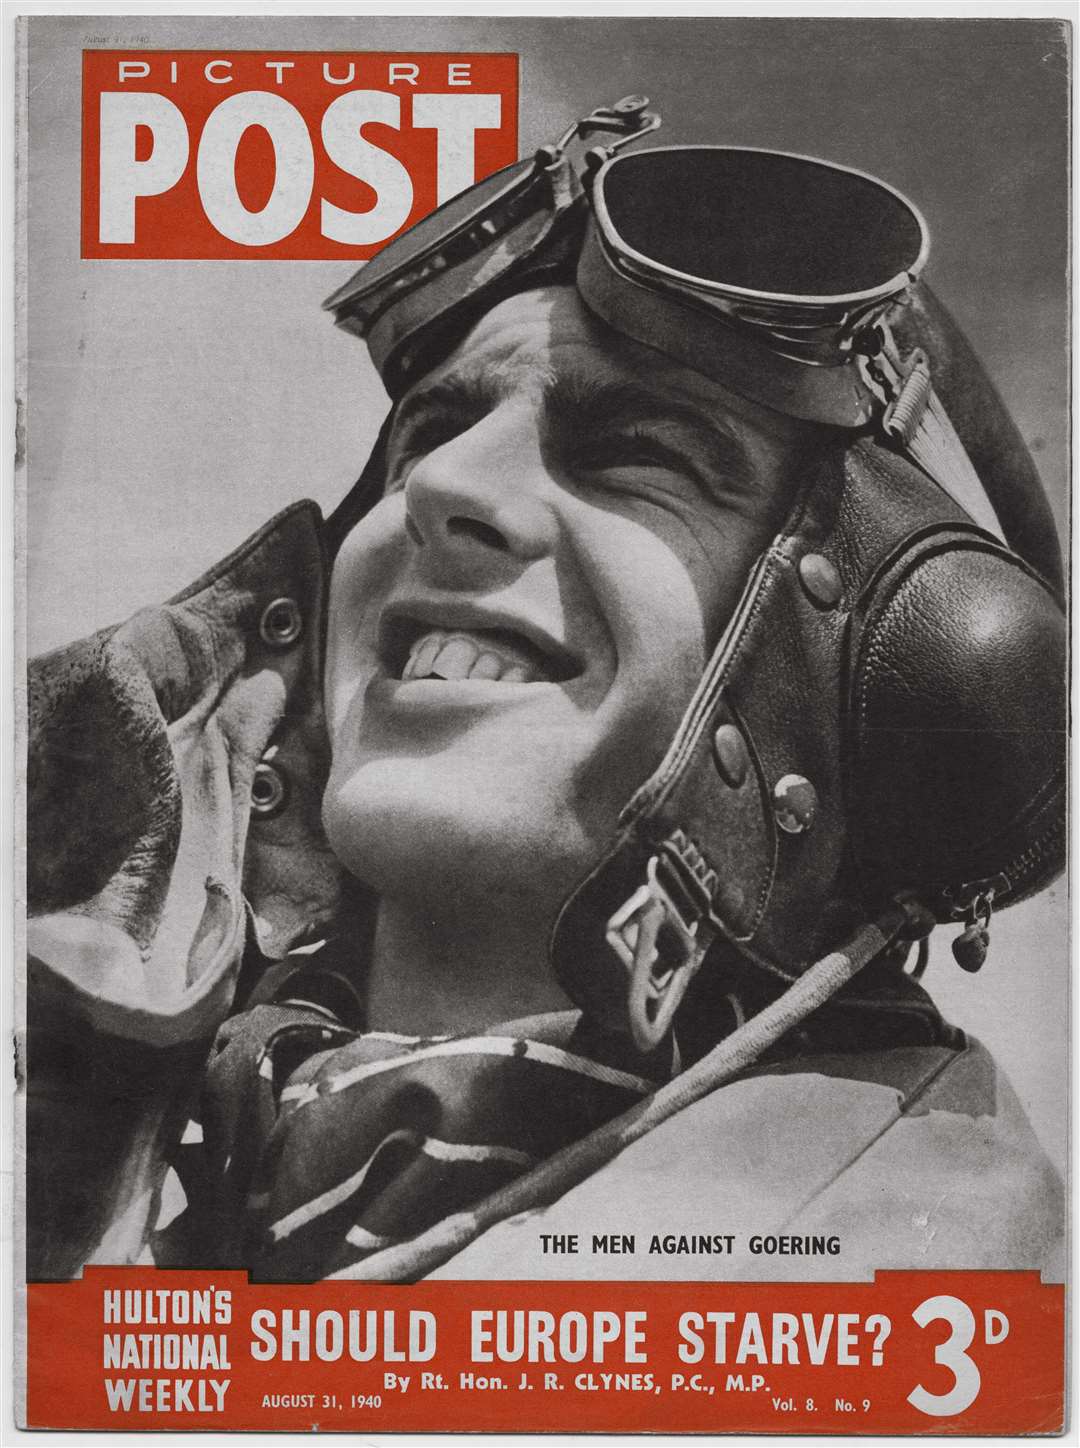 Pilot Officer Keith Gillman crashed in an unknown location around the Goodwins on August 25 1940, one week before his photograph was published on the front cover of Picture Post. Picture: Fox Photos/Getty Images